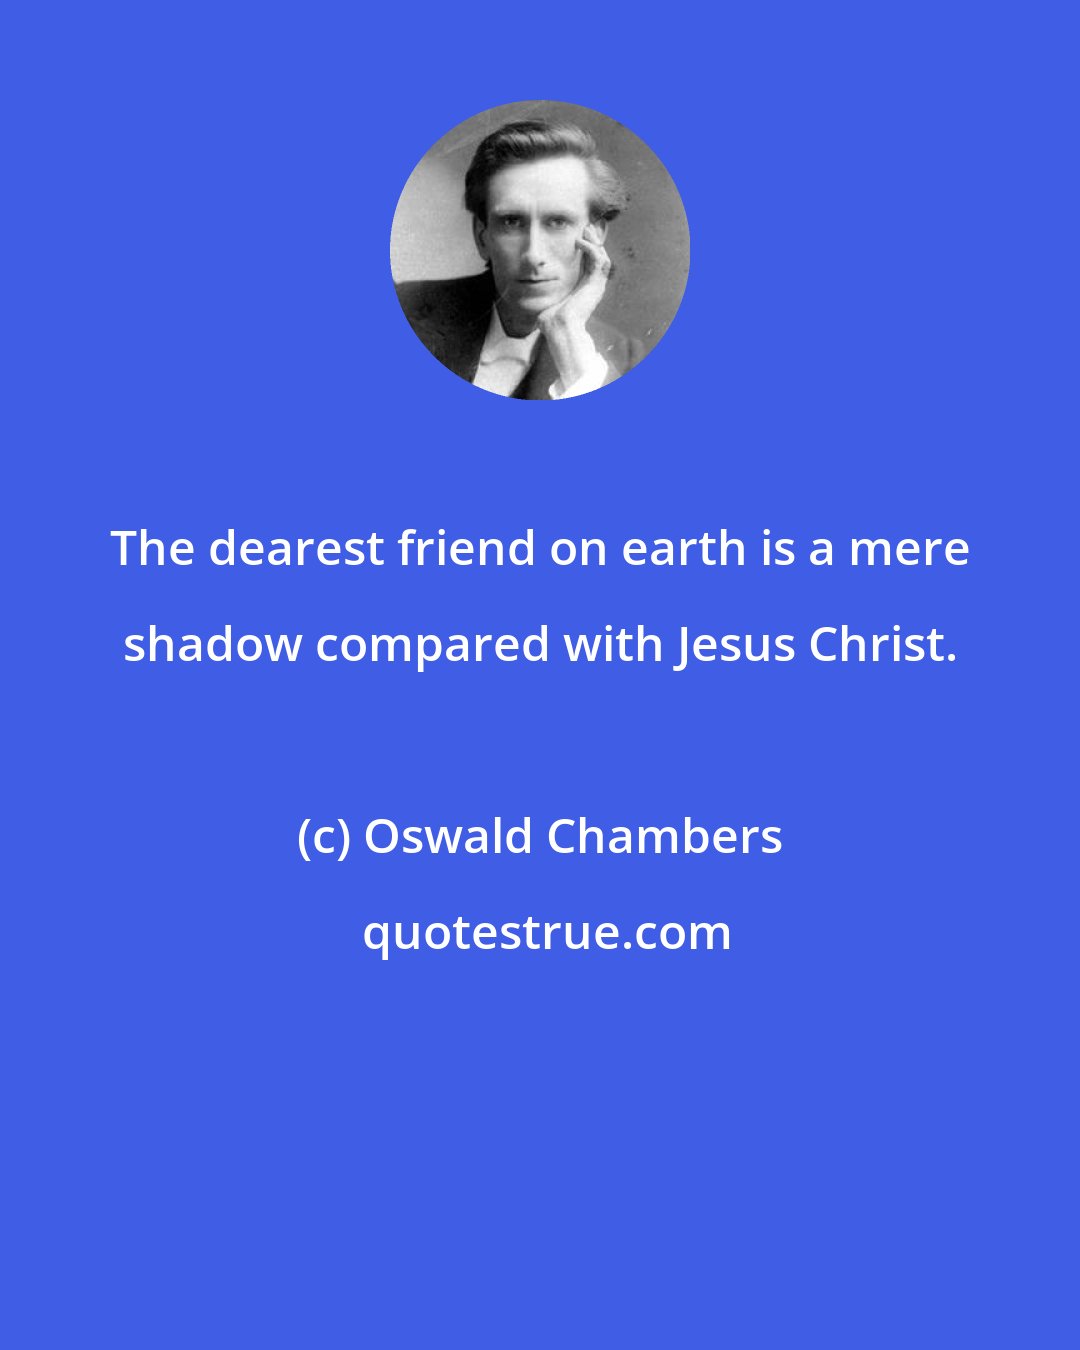 Oswald Chambers: The dearest friend on earth is a mere shadow compared with Jesus Christ.